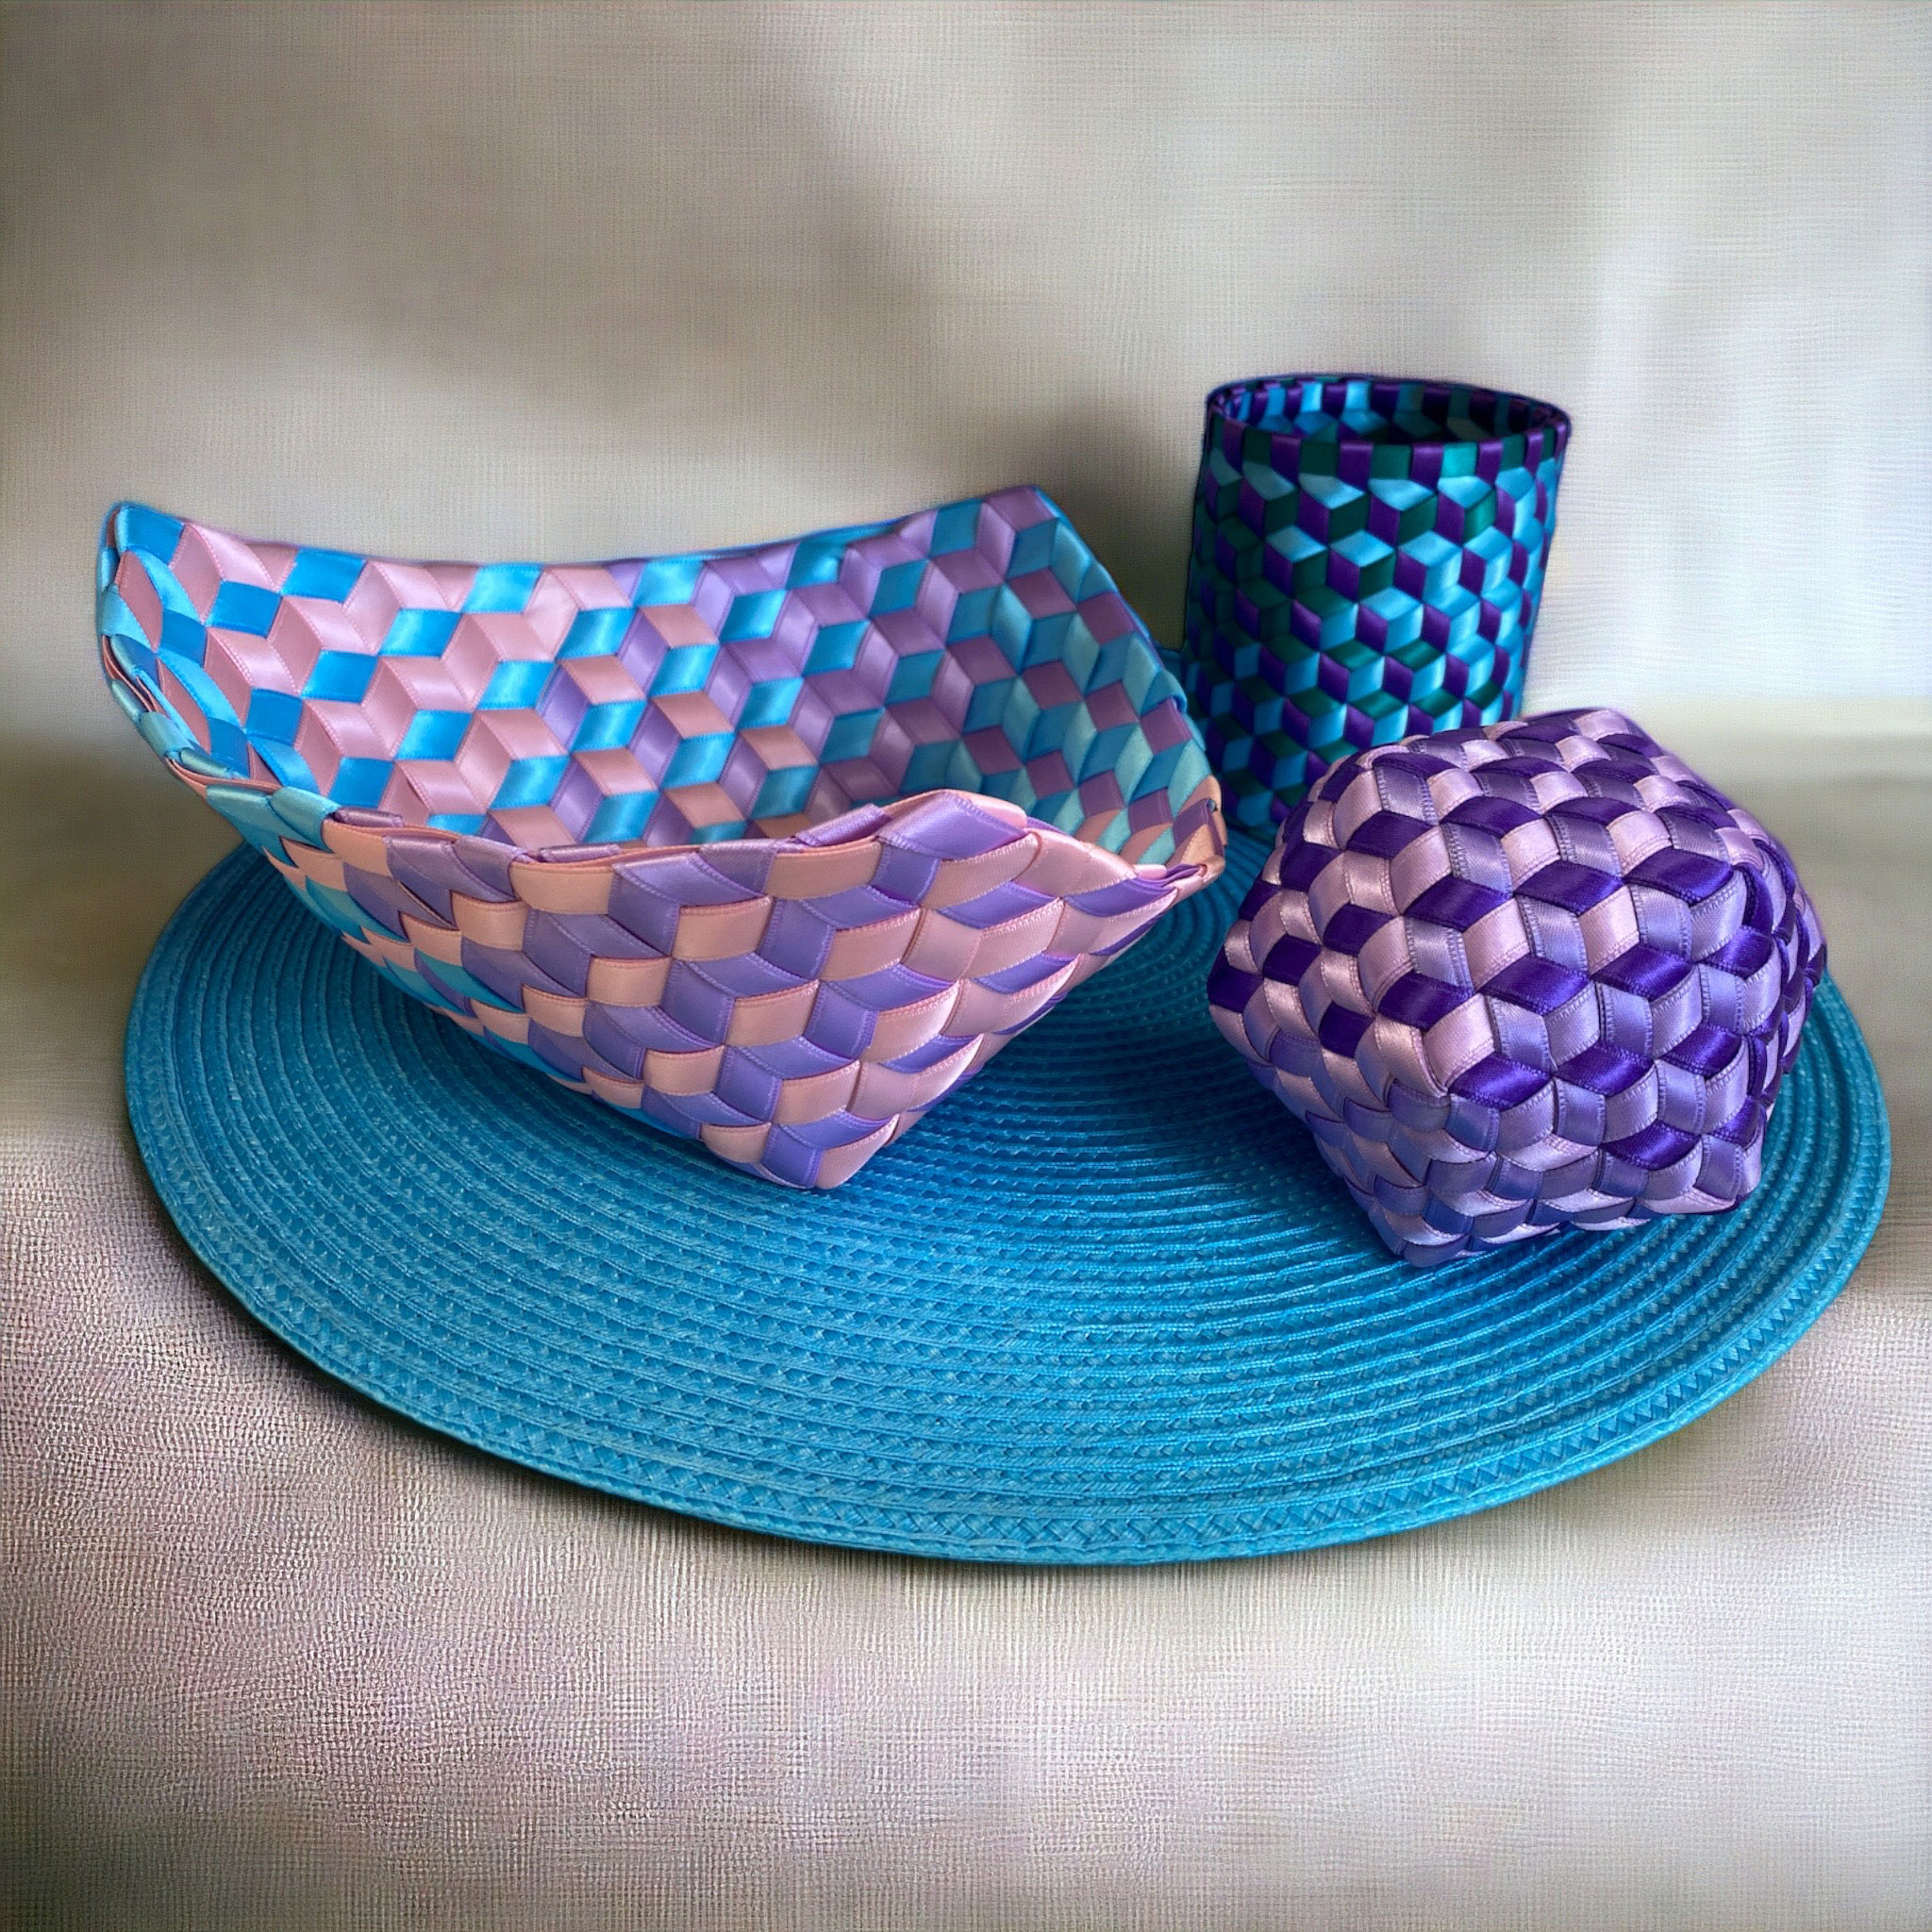 Woven Ribbon Baskets by Peggy Thrasher